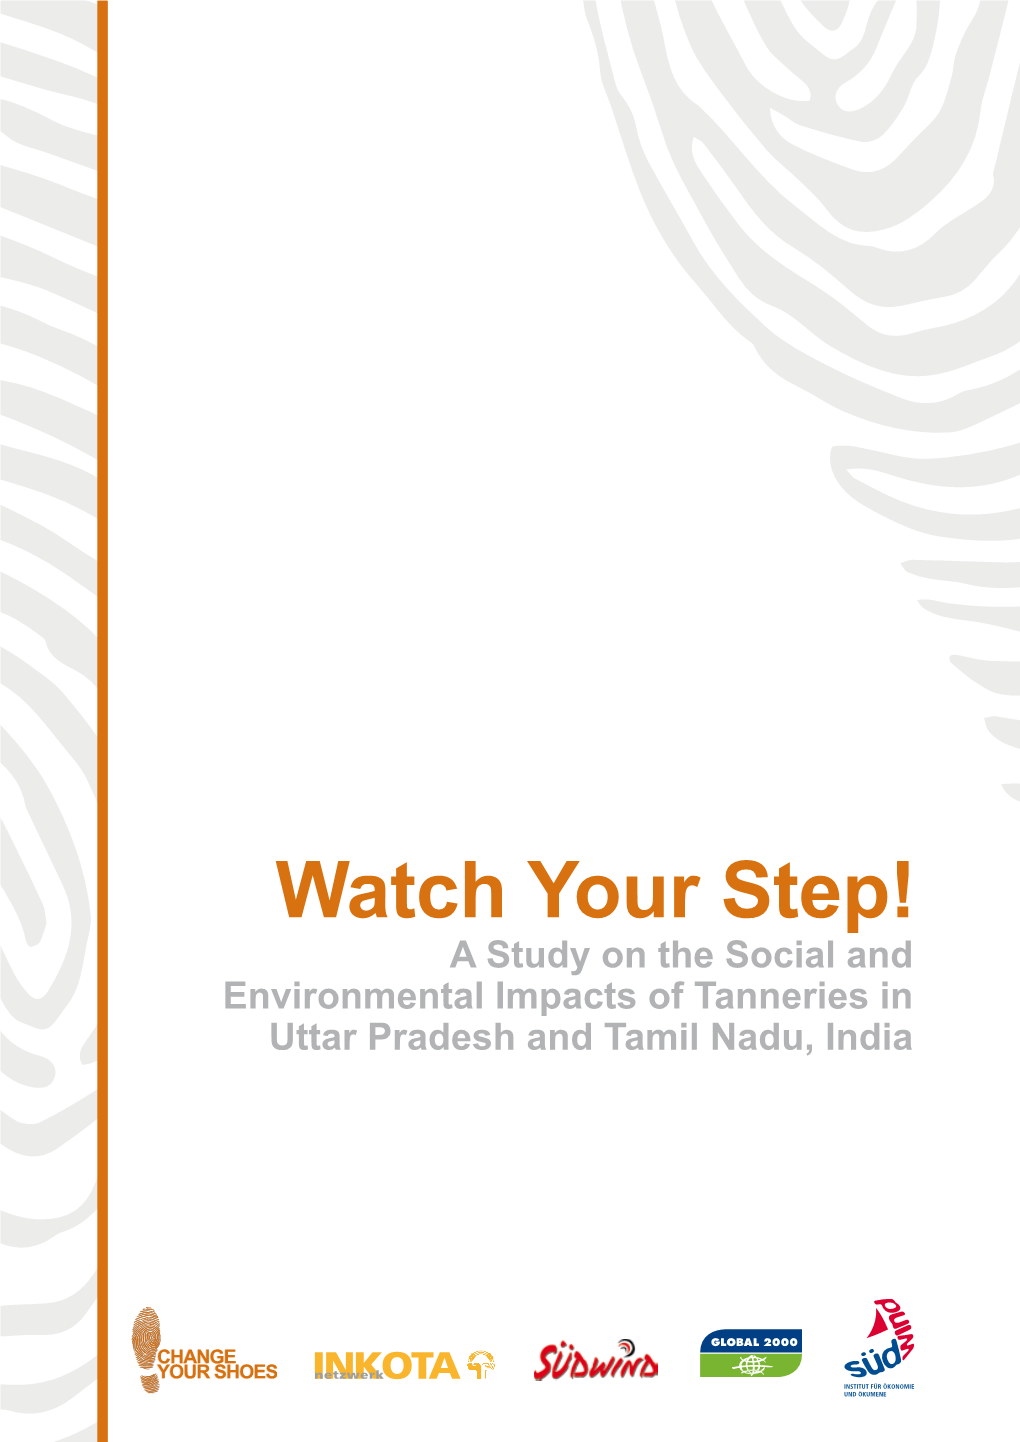 Watch Your Step! a Study on the Social and Environmental Impacts of Tanneries in Uttar Pradesh and Tamil Nadu, India